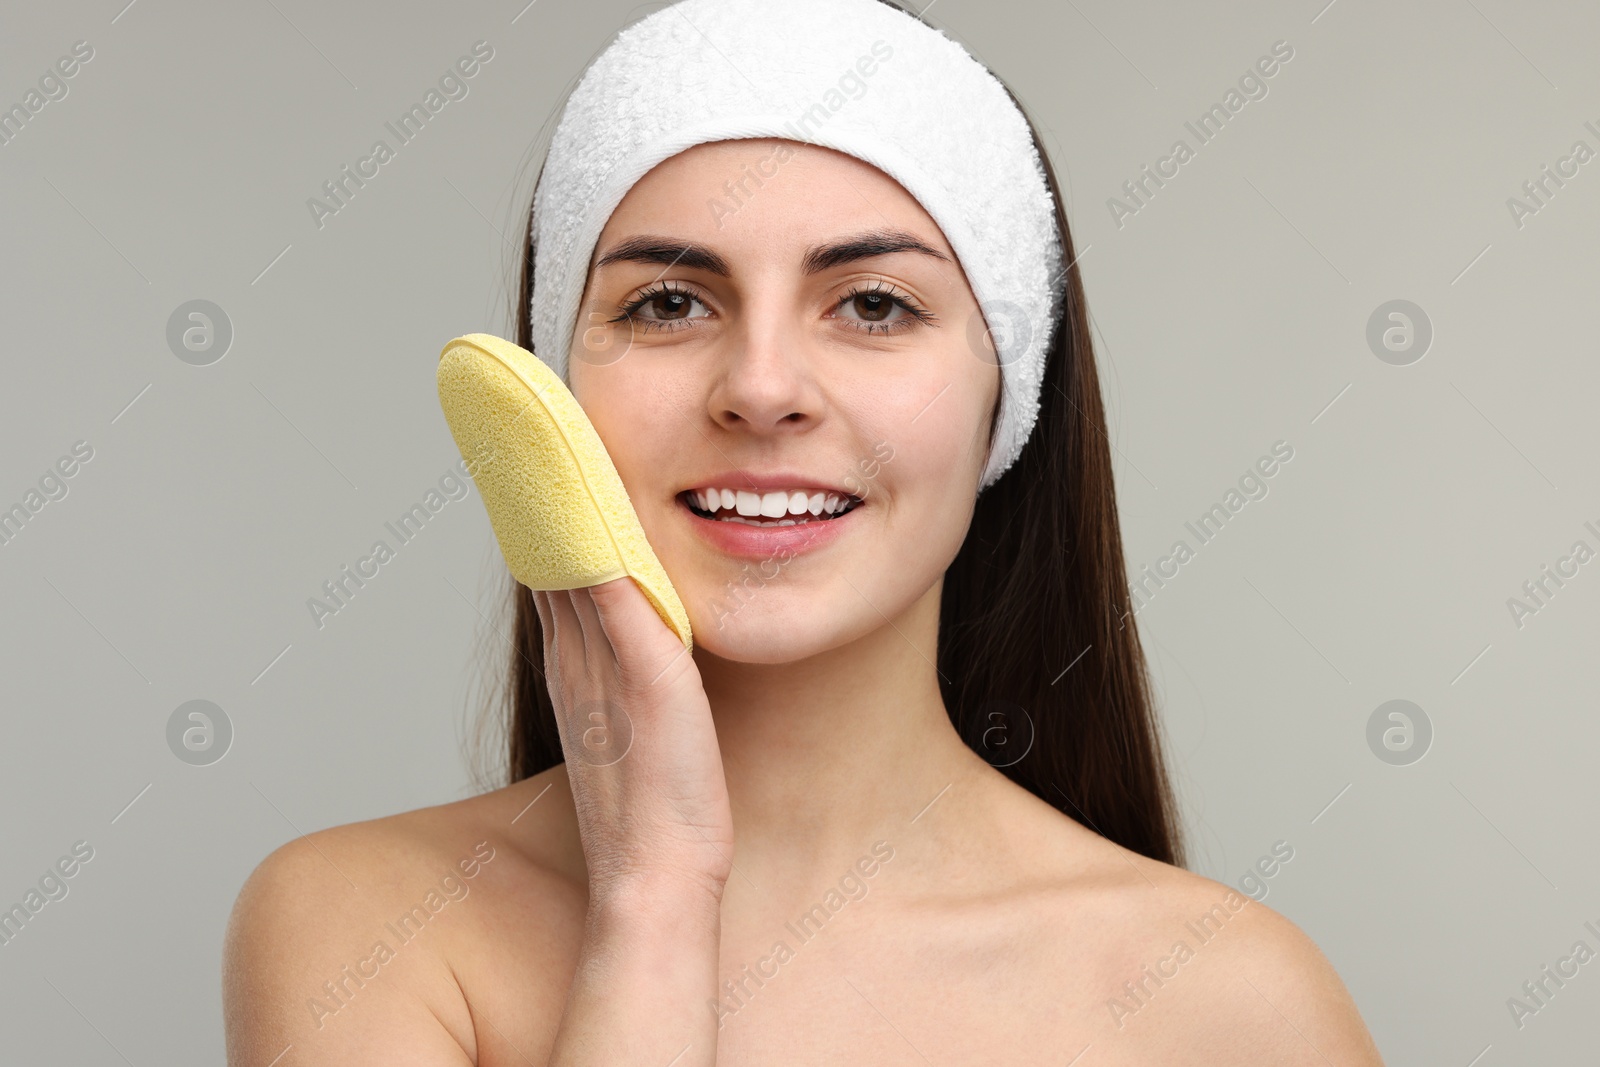 Photo of Young woman with headband washing her face using sponge on light grey background